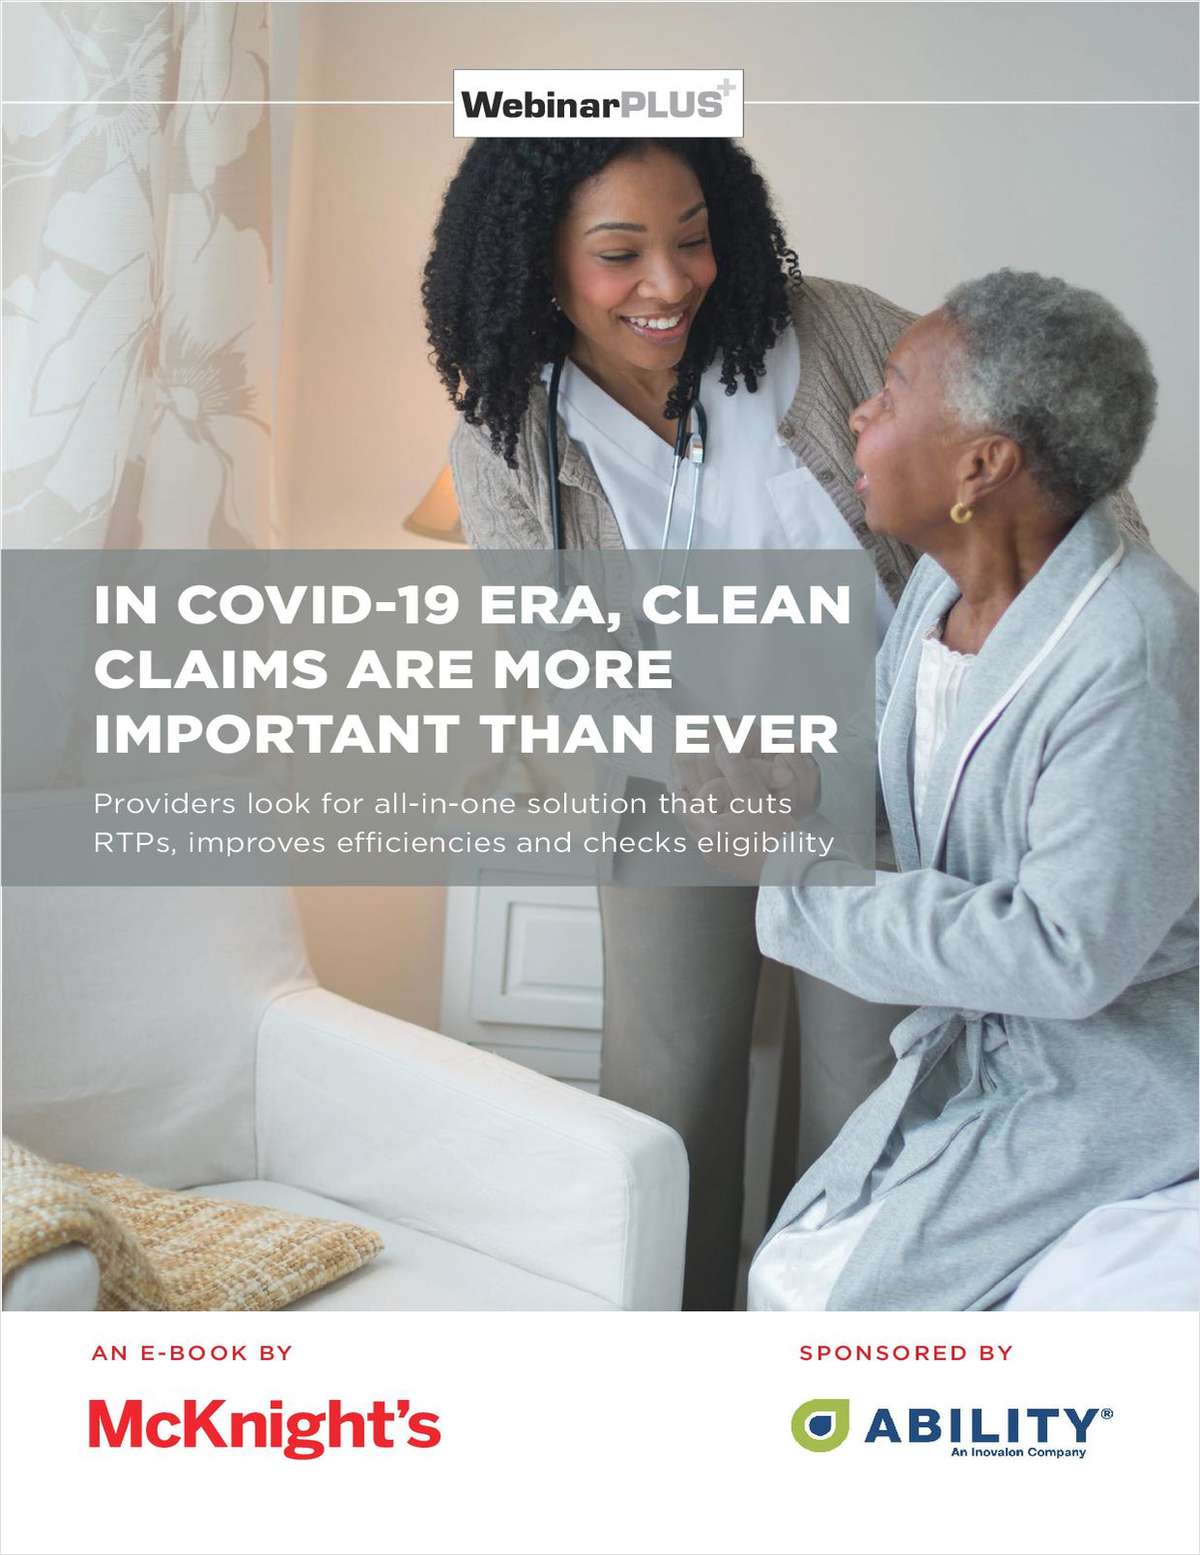 In COVID-19 Era, Clean Claims are More Important than Ever